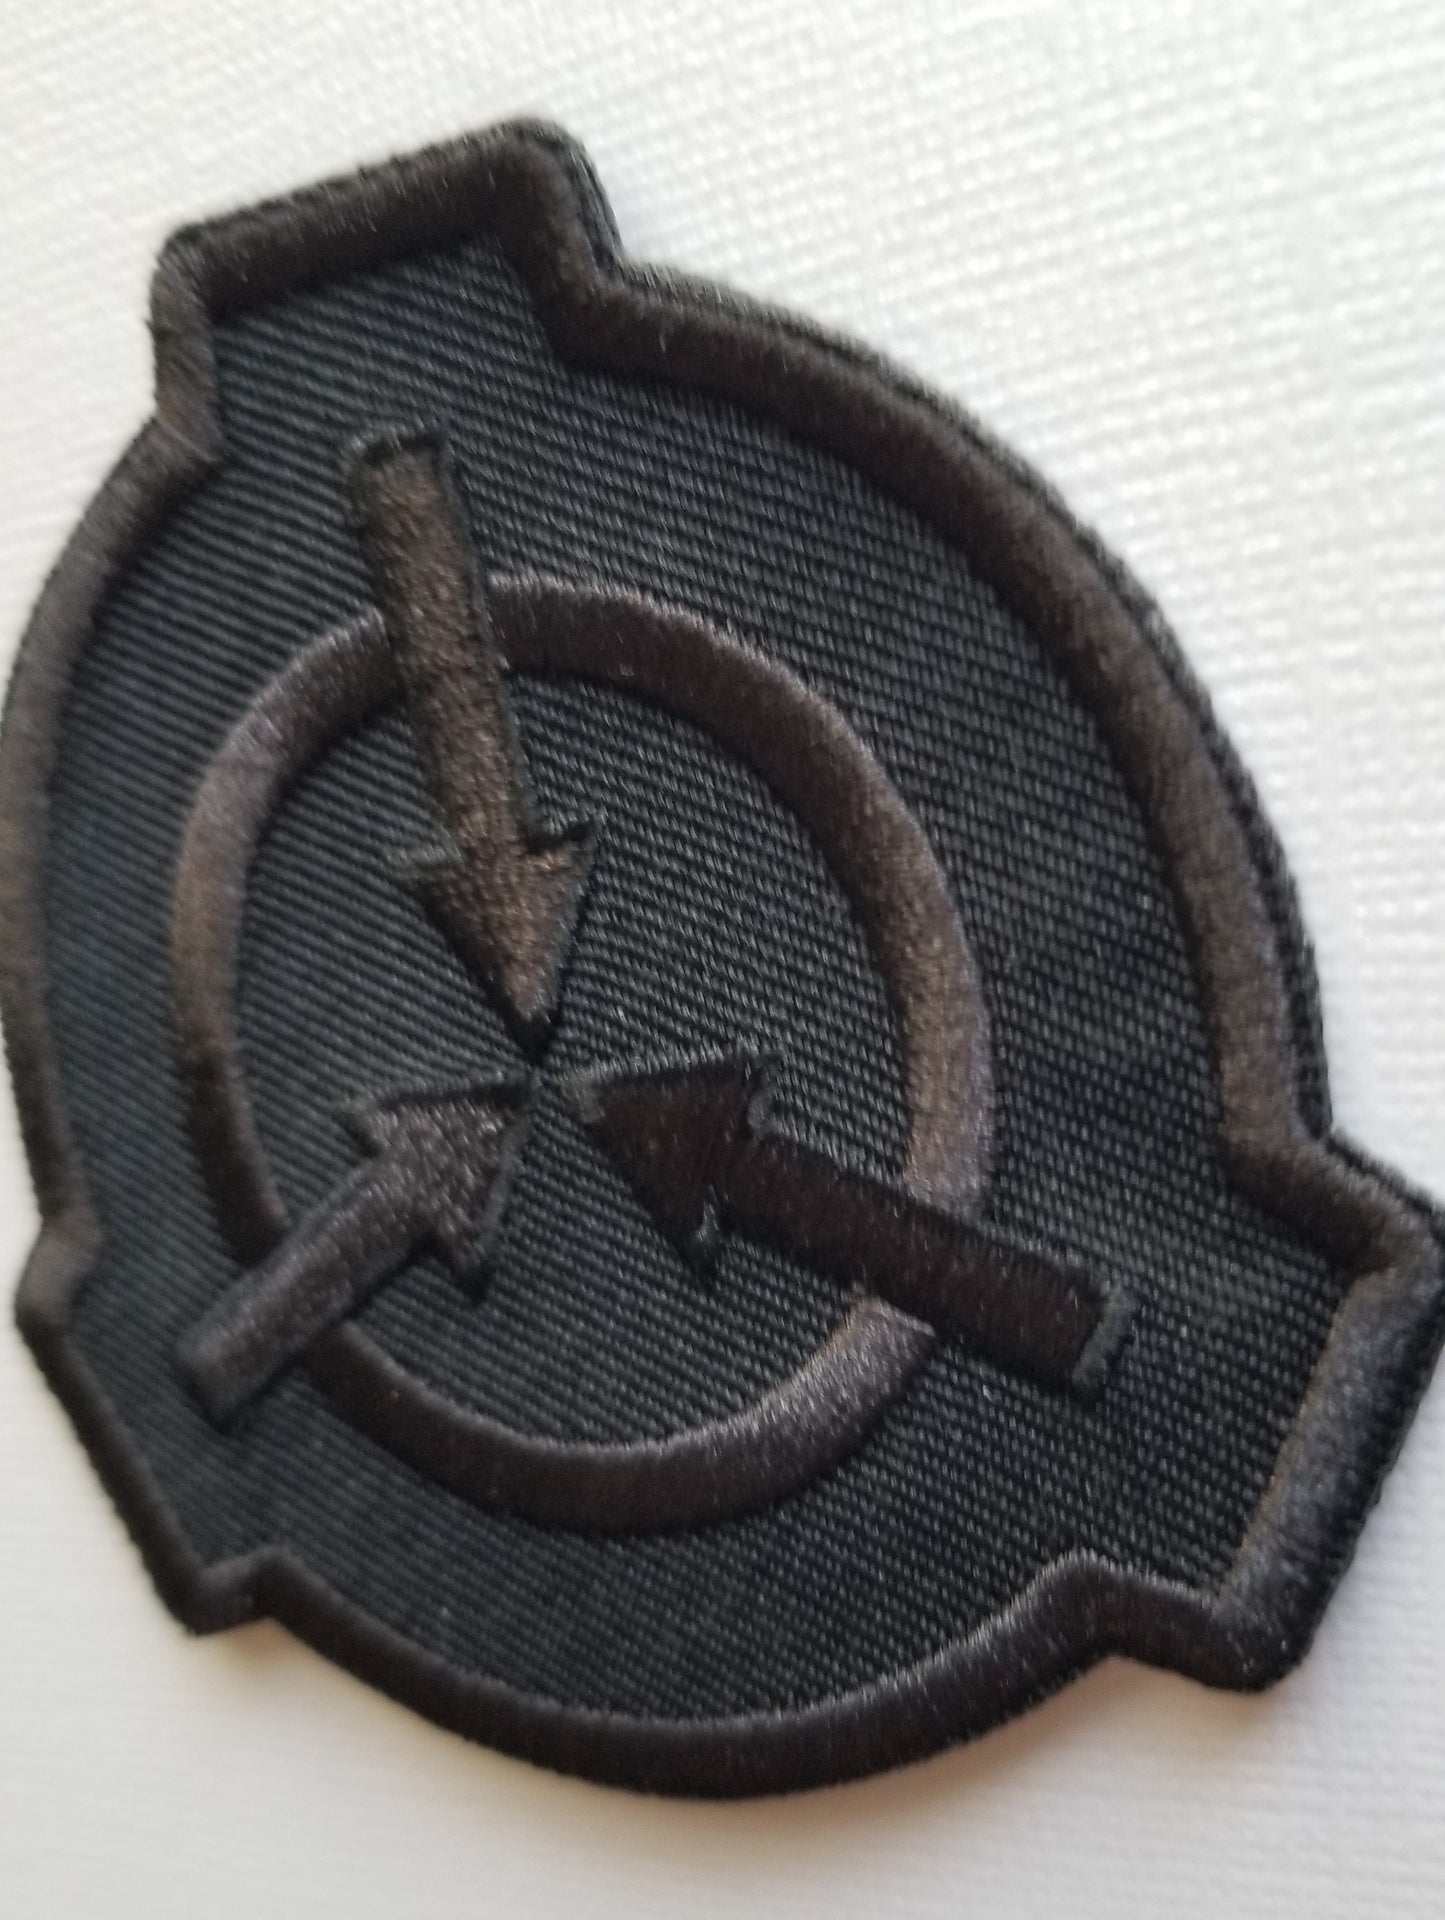 Black Ops SCP Logo 3 Inch Patch